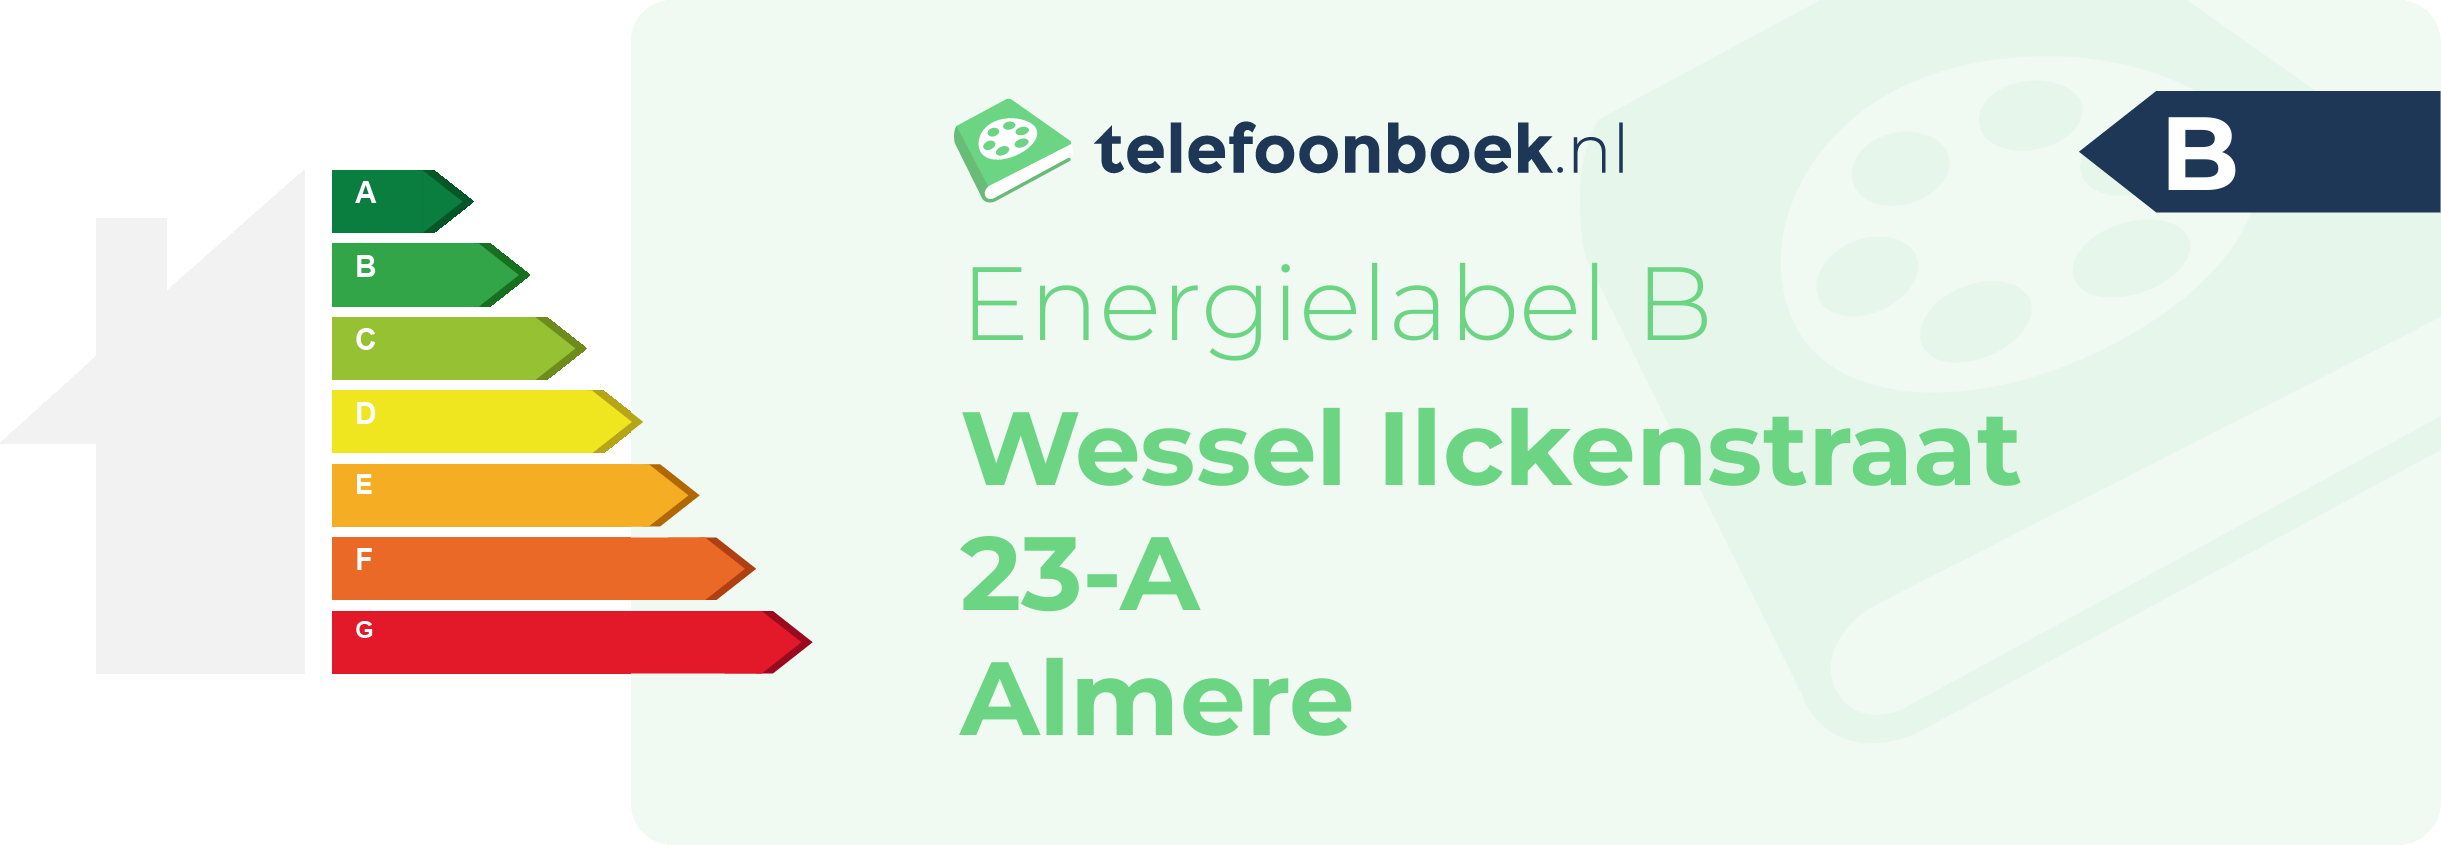 Energielabel Wessel Ilckenstraat 23-A Almere